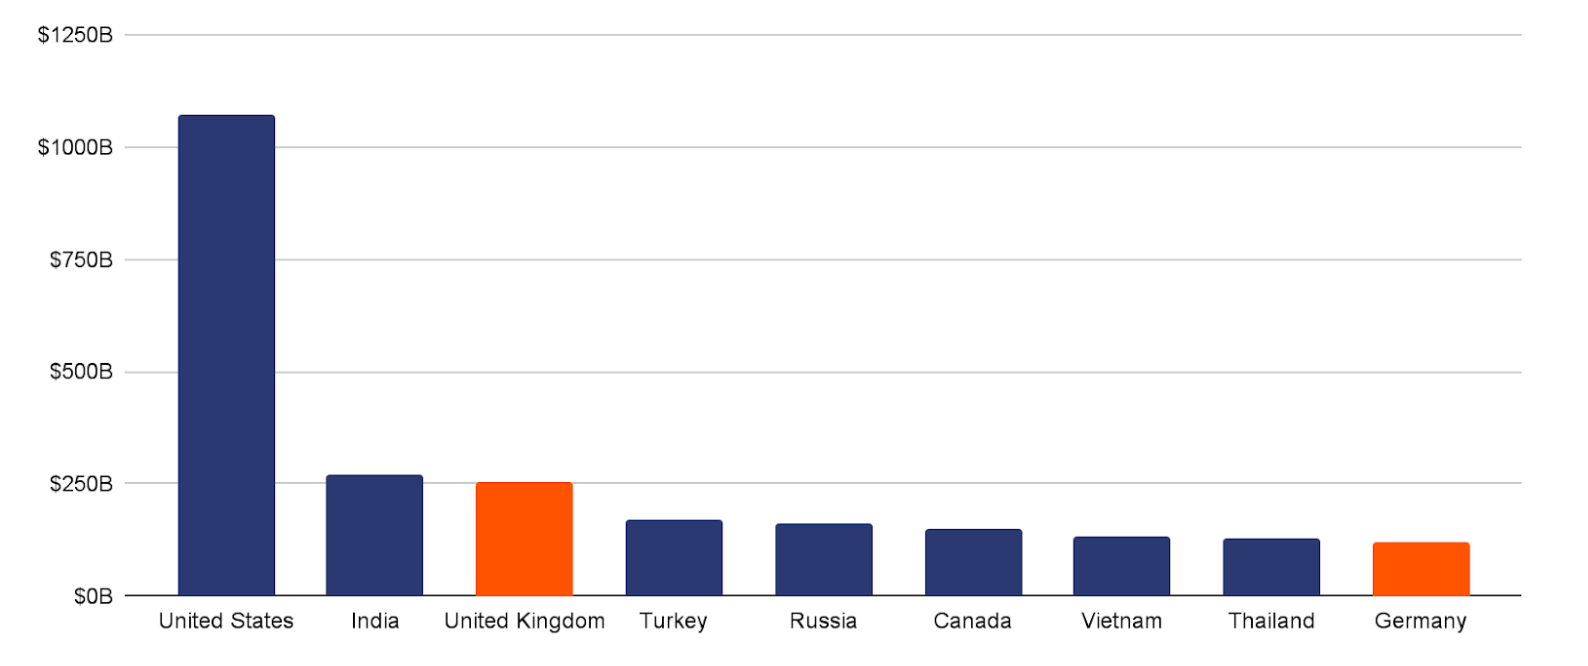 Top countries by cryptocurrency value received between July 2022 and June 2023. Source: Chainalysis